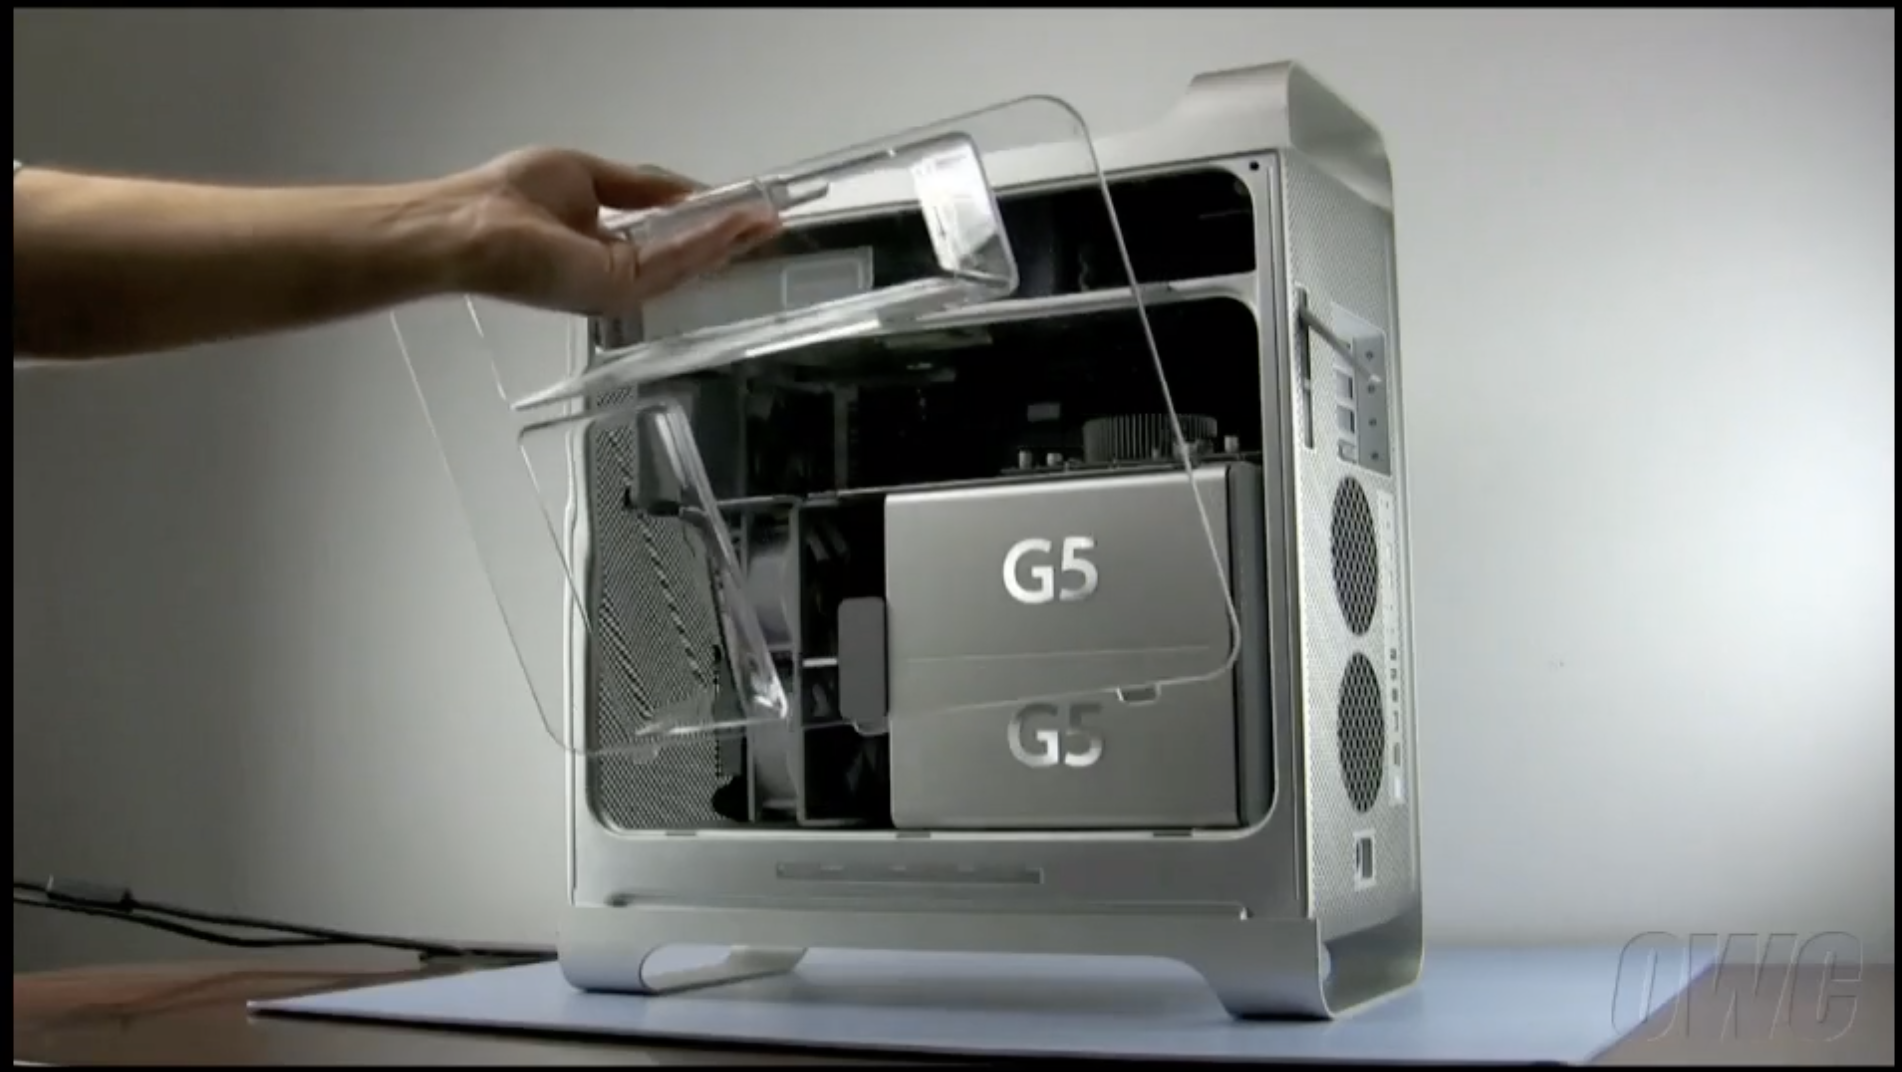 Power Mac G5: Reduced processor and bus … - Apple Community